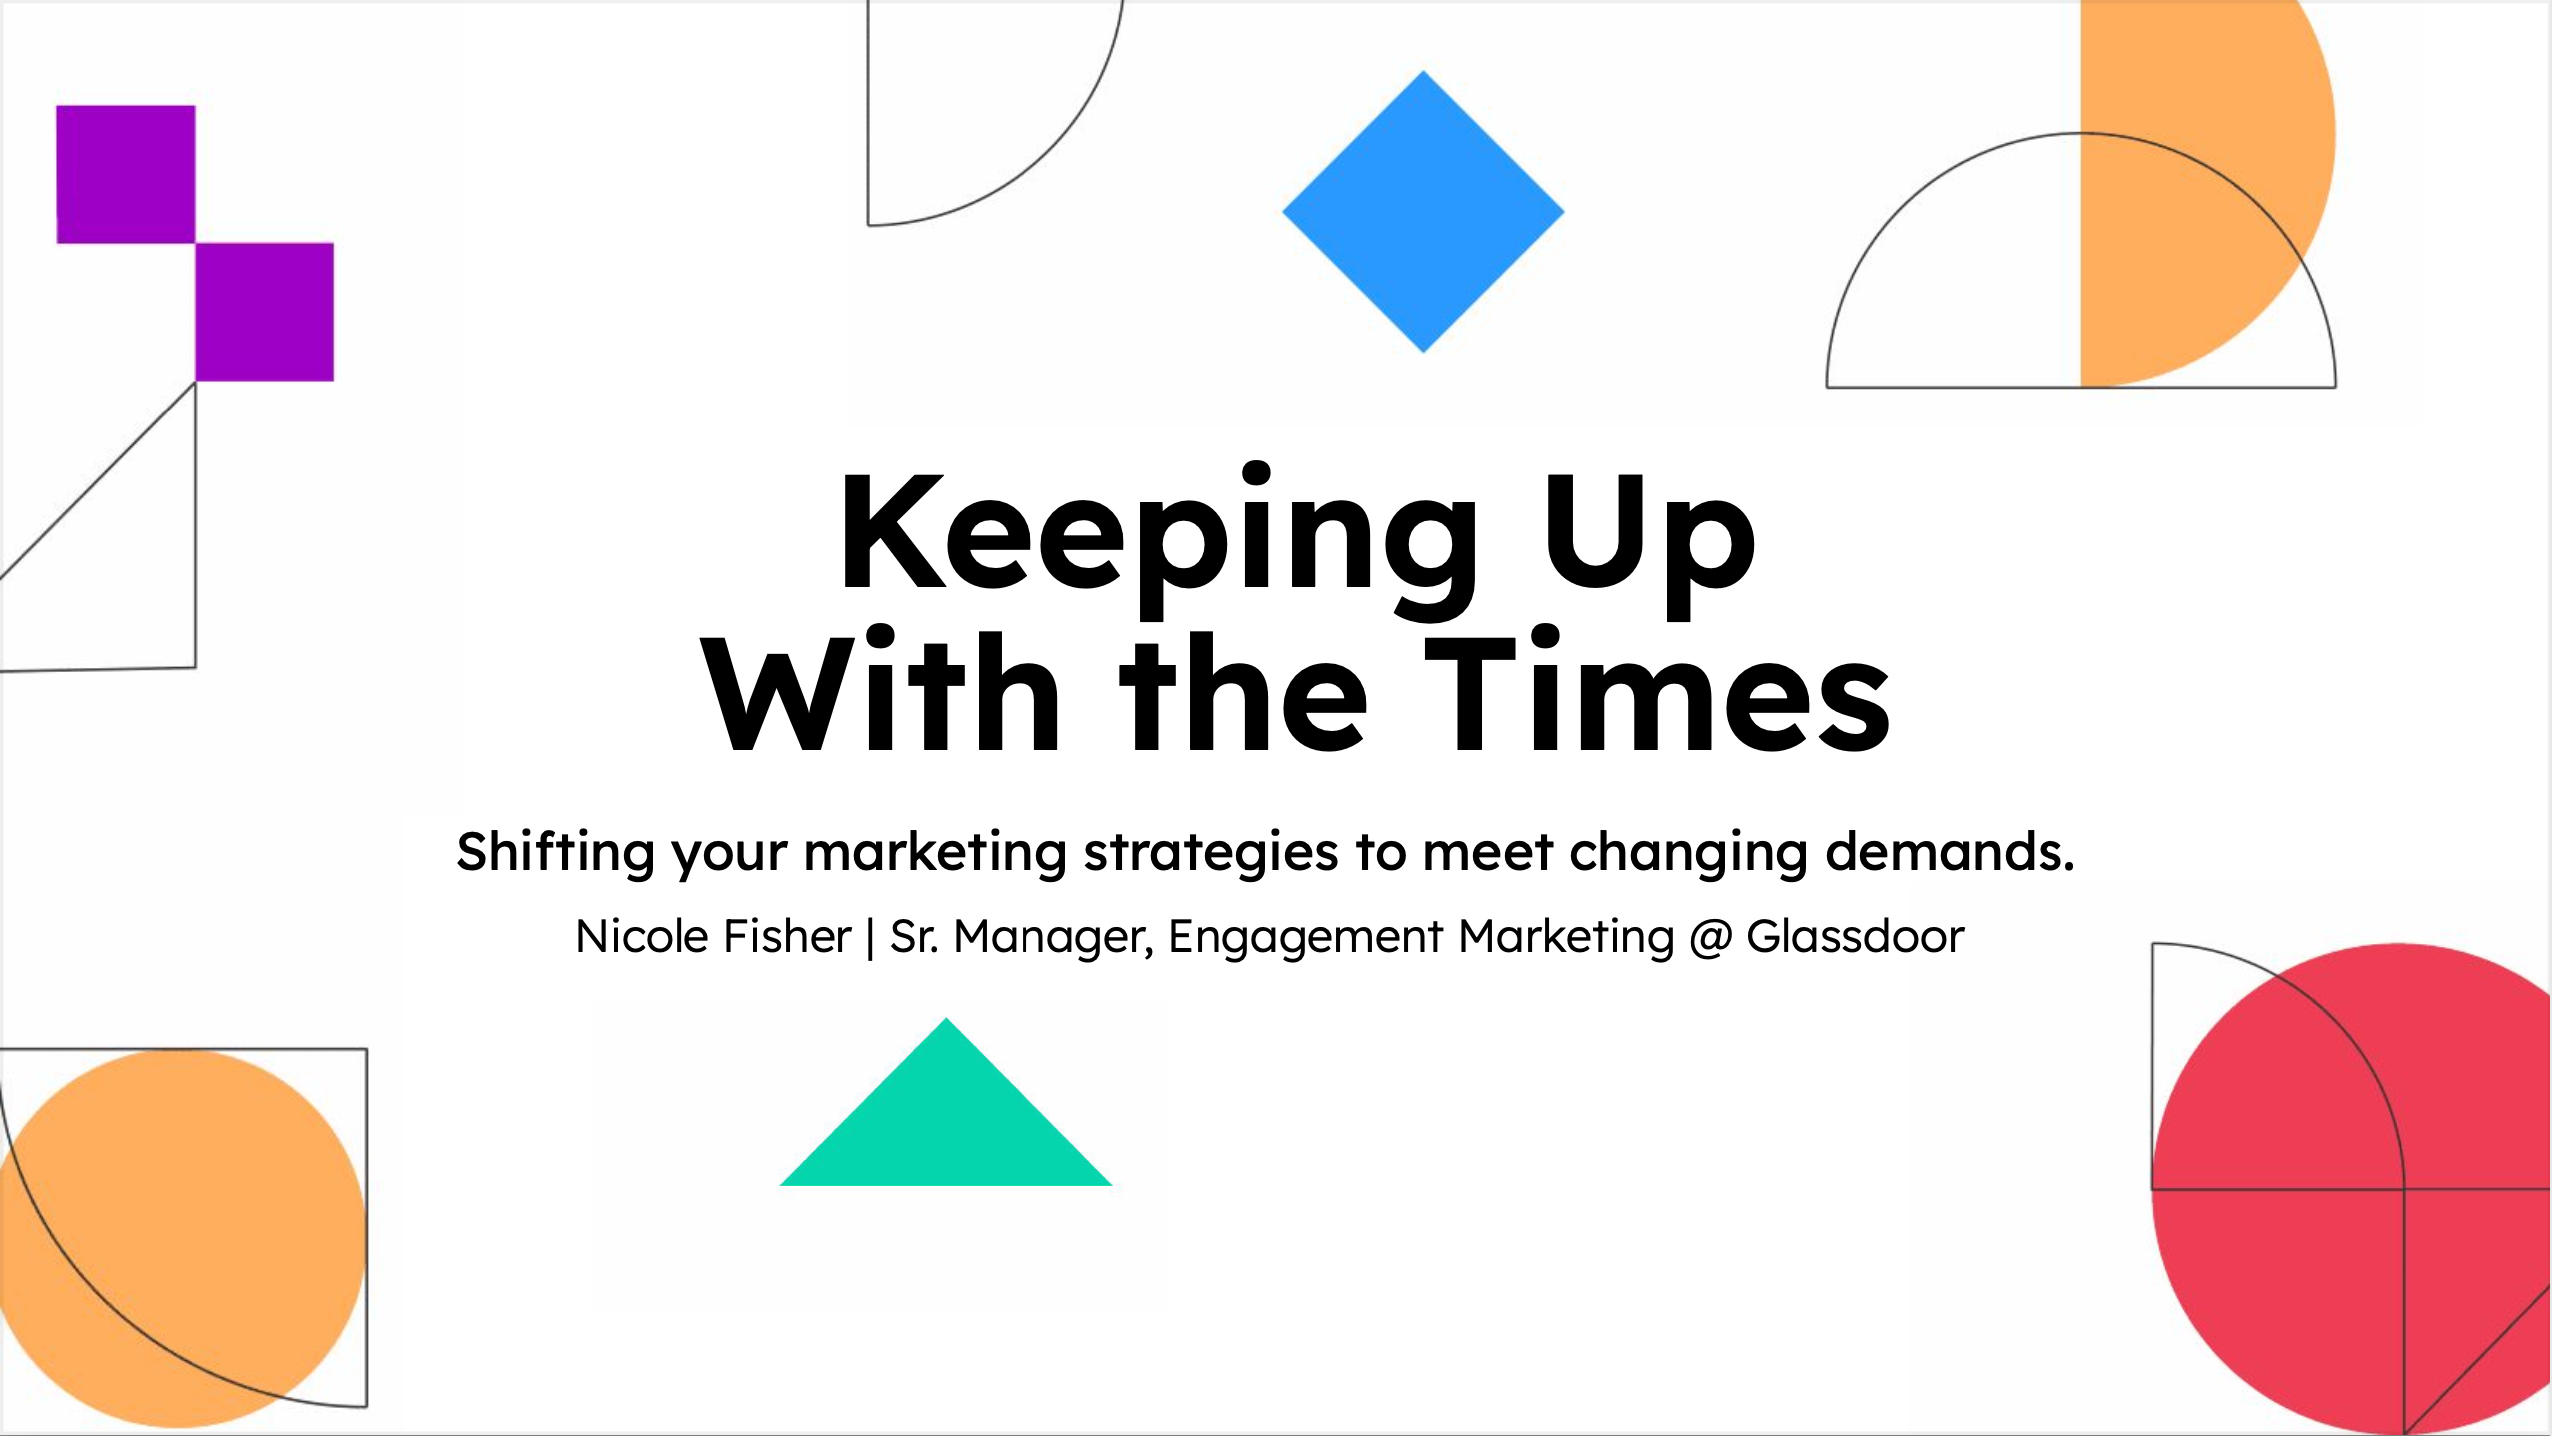 Keep Up With The Times: Advice for Shifting Your Marketing Strategies